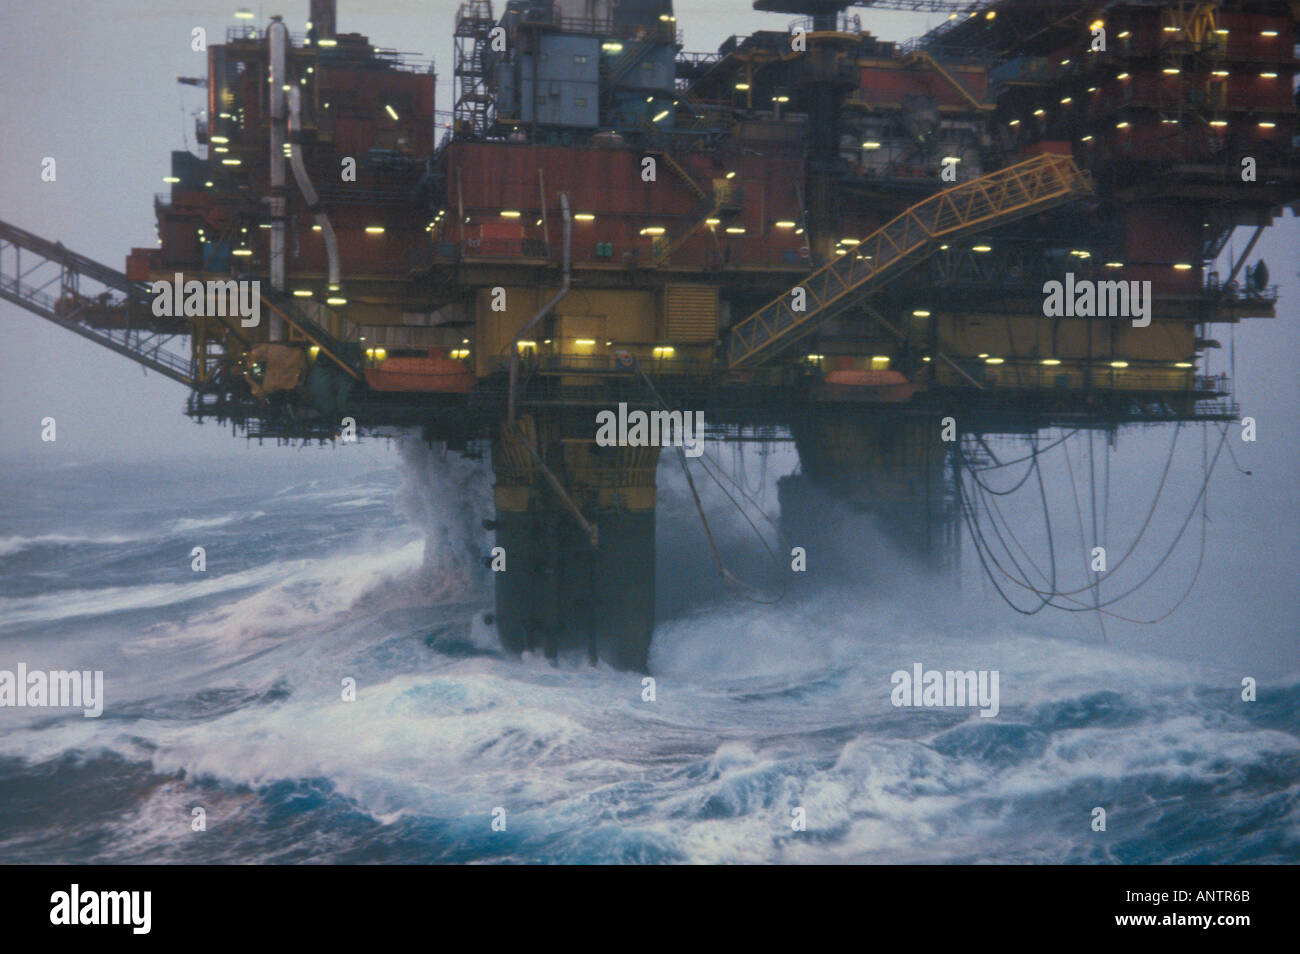 Offshore Oil Drilling Bad